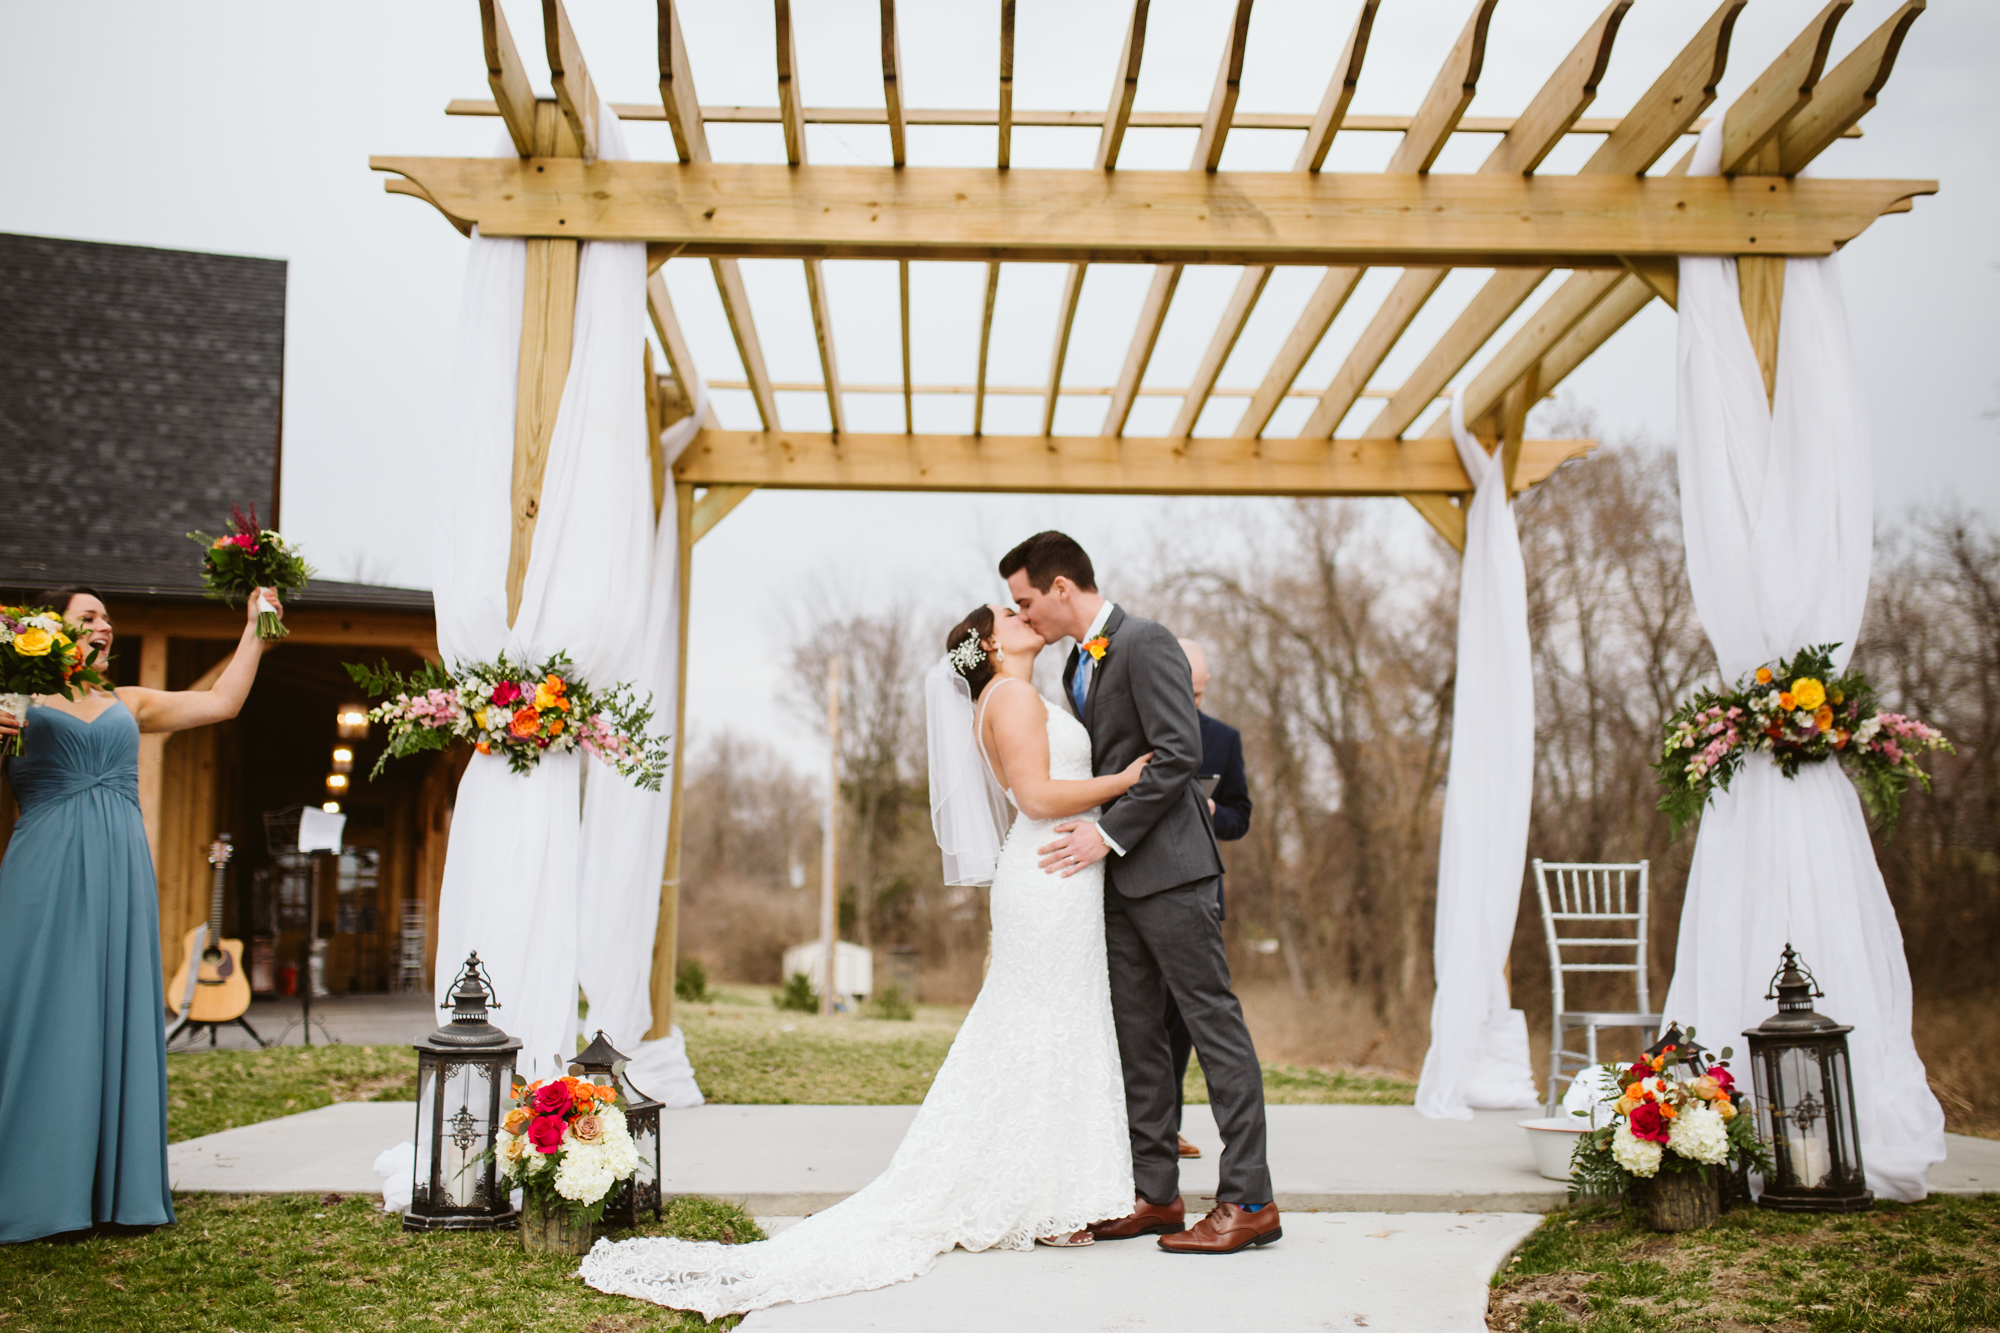 Bride and groom's first kiss at the stone house of st charles wedding venue in st louis